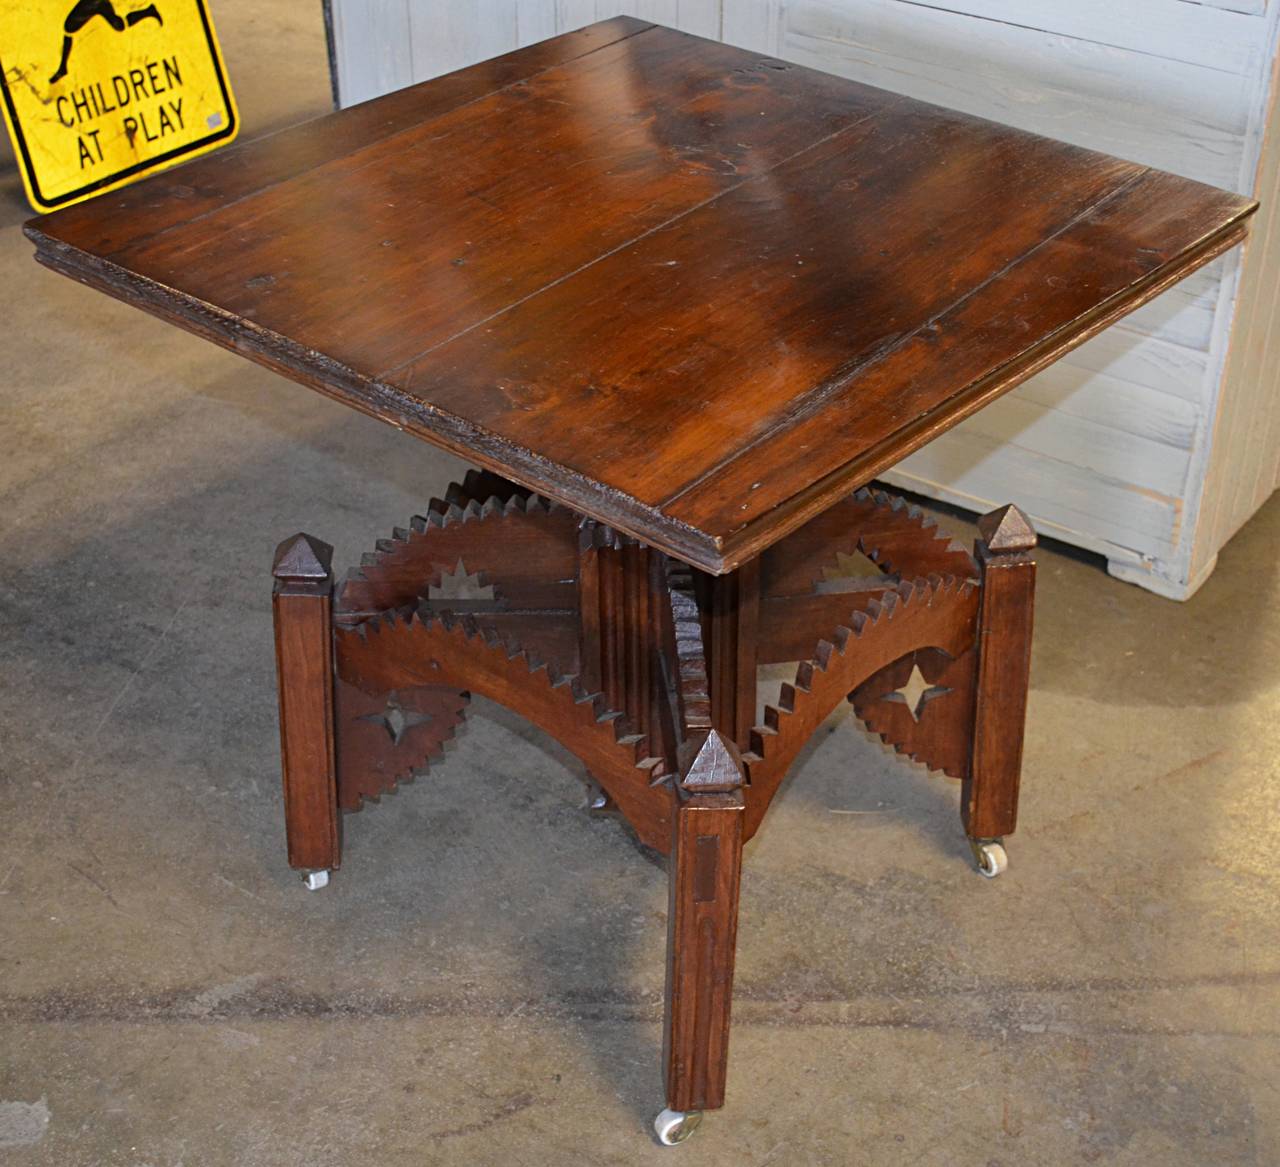 A wonderful example of late 19th century folk art in furniture. Four board pine top joined on angled cuts. Fluted square column pedestal supported by arched stretchers with rickrack details joined to four square posts with pyramid finials and